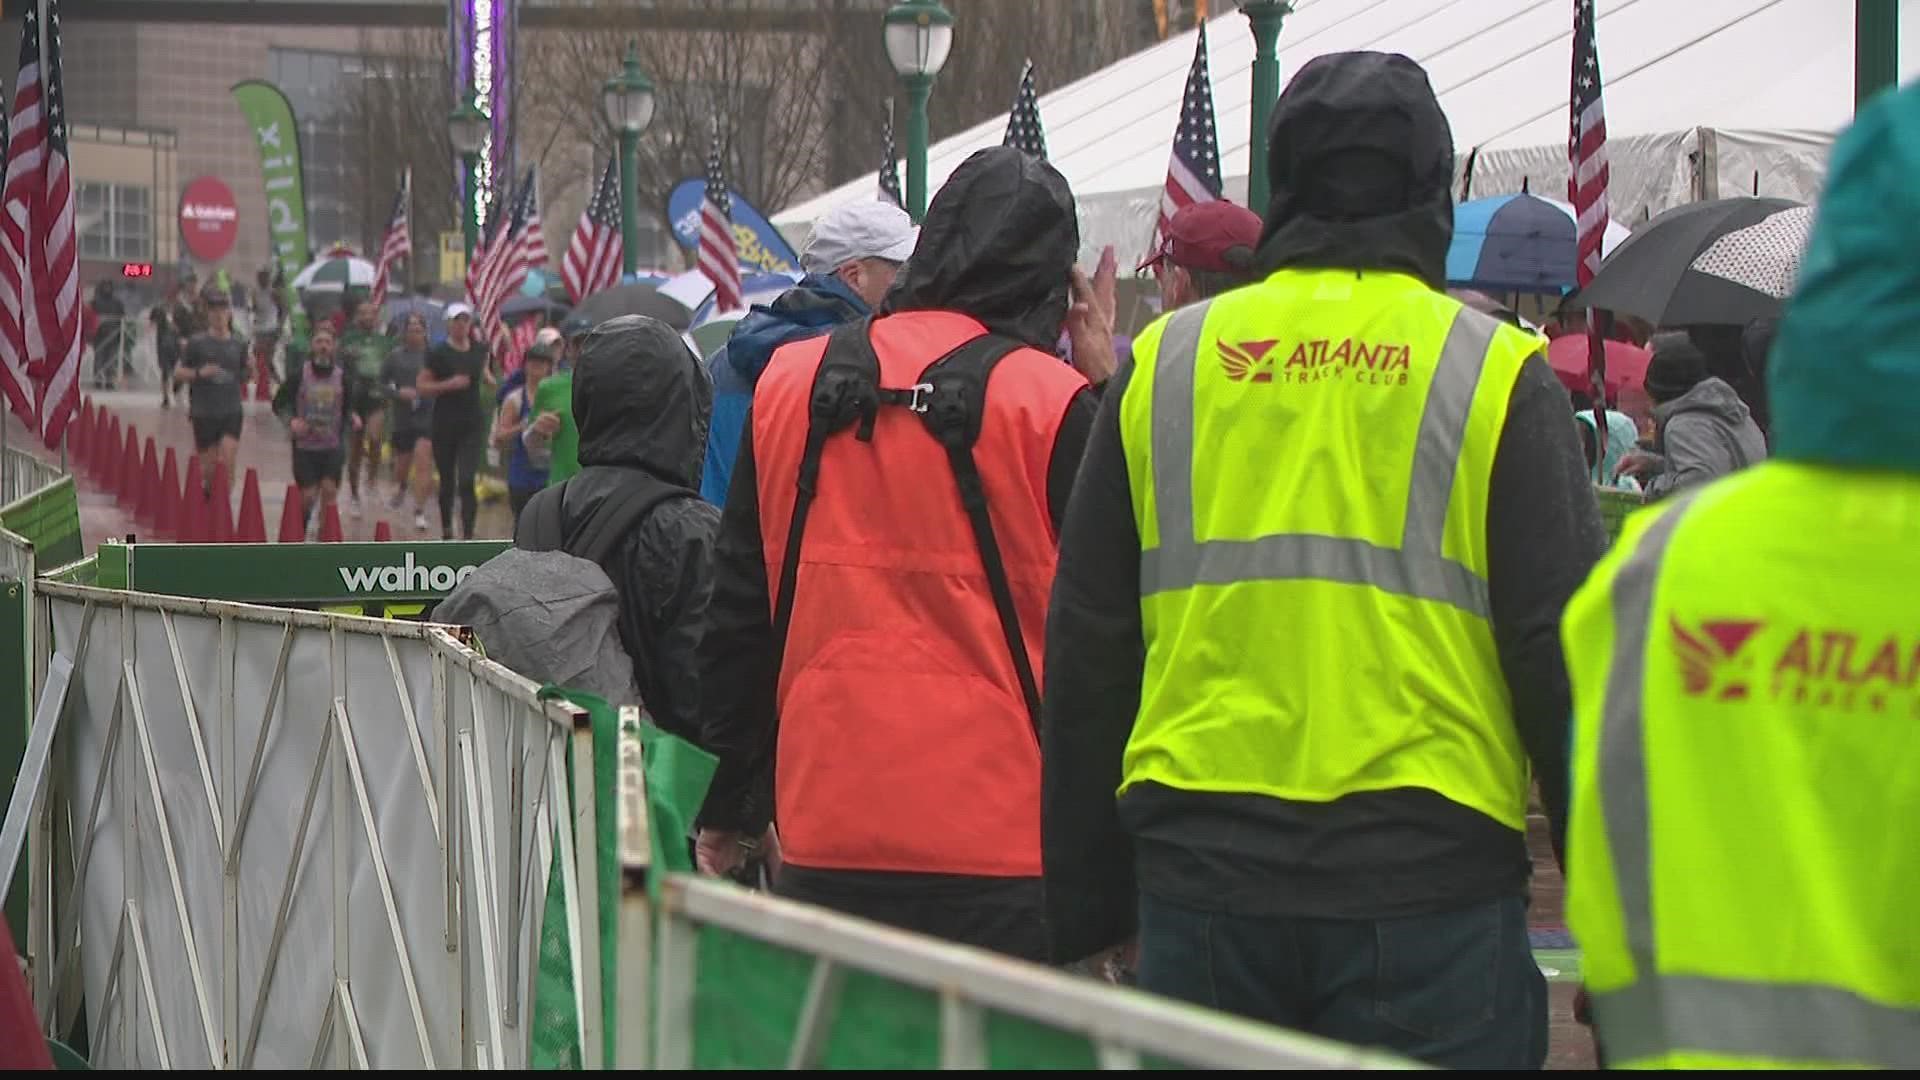 With nearly 8,000 participants, world and state records were set in the Publix Atlanta Marathon weekend.